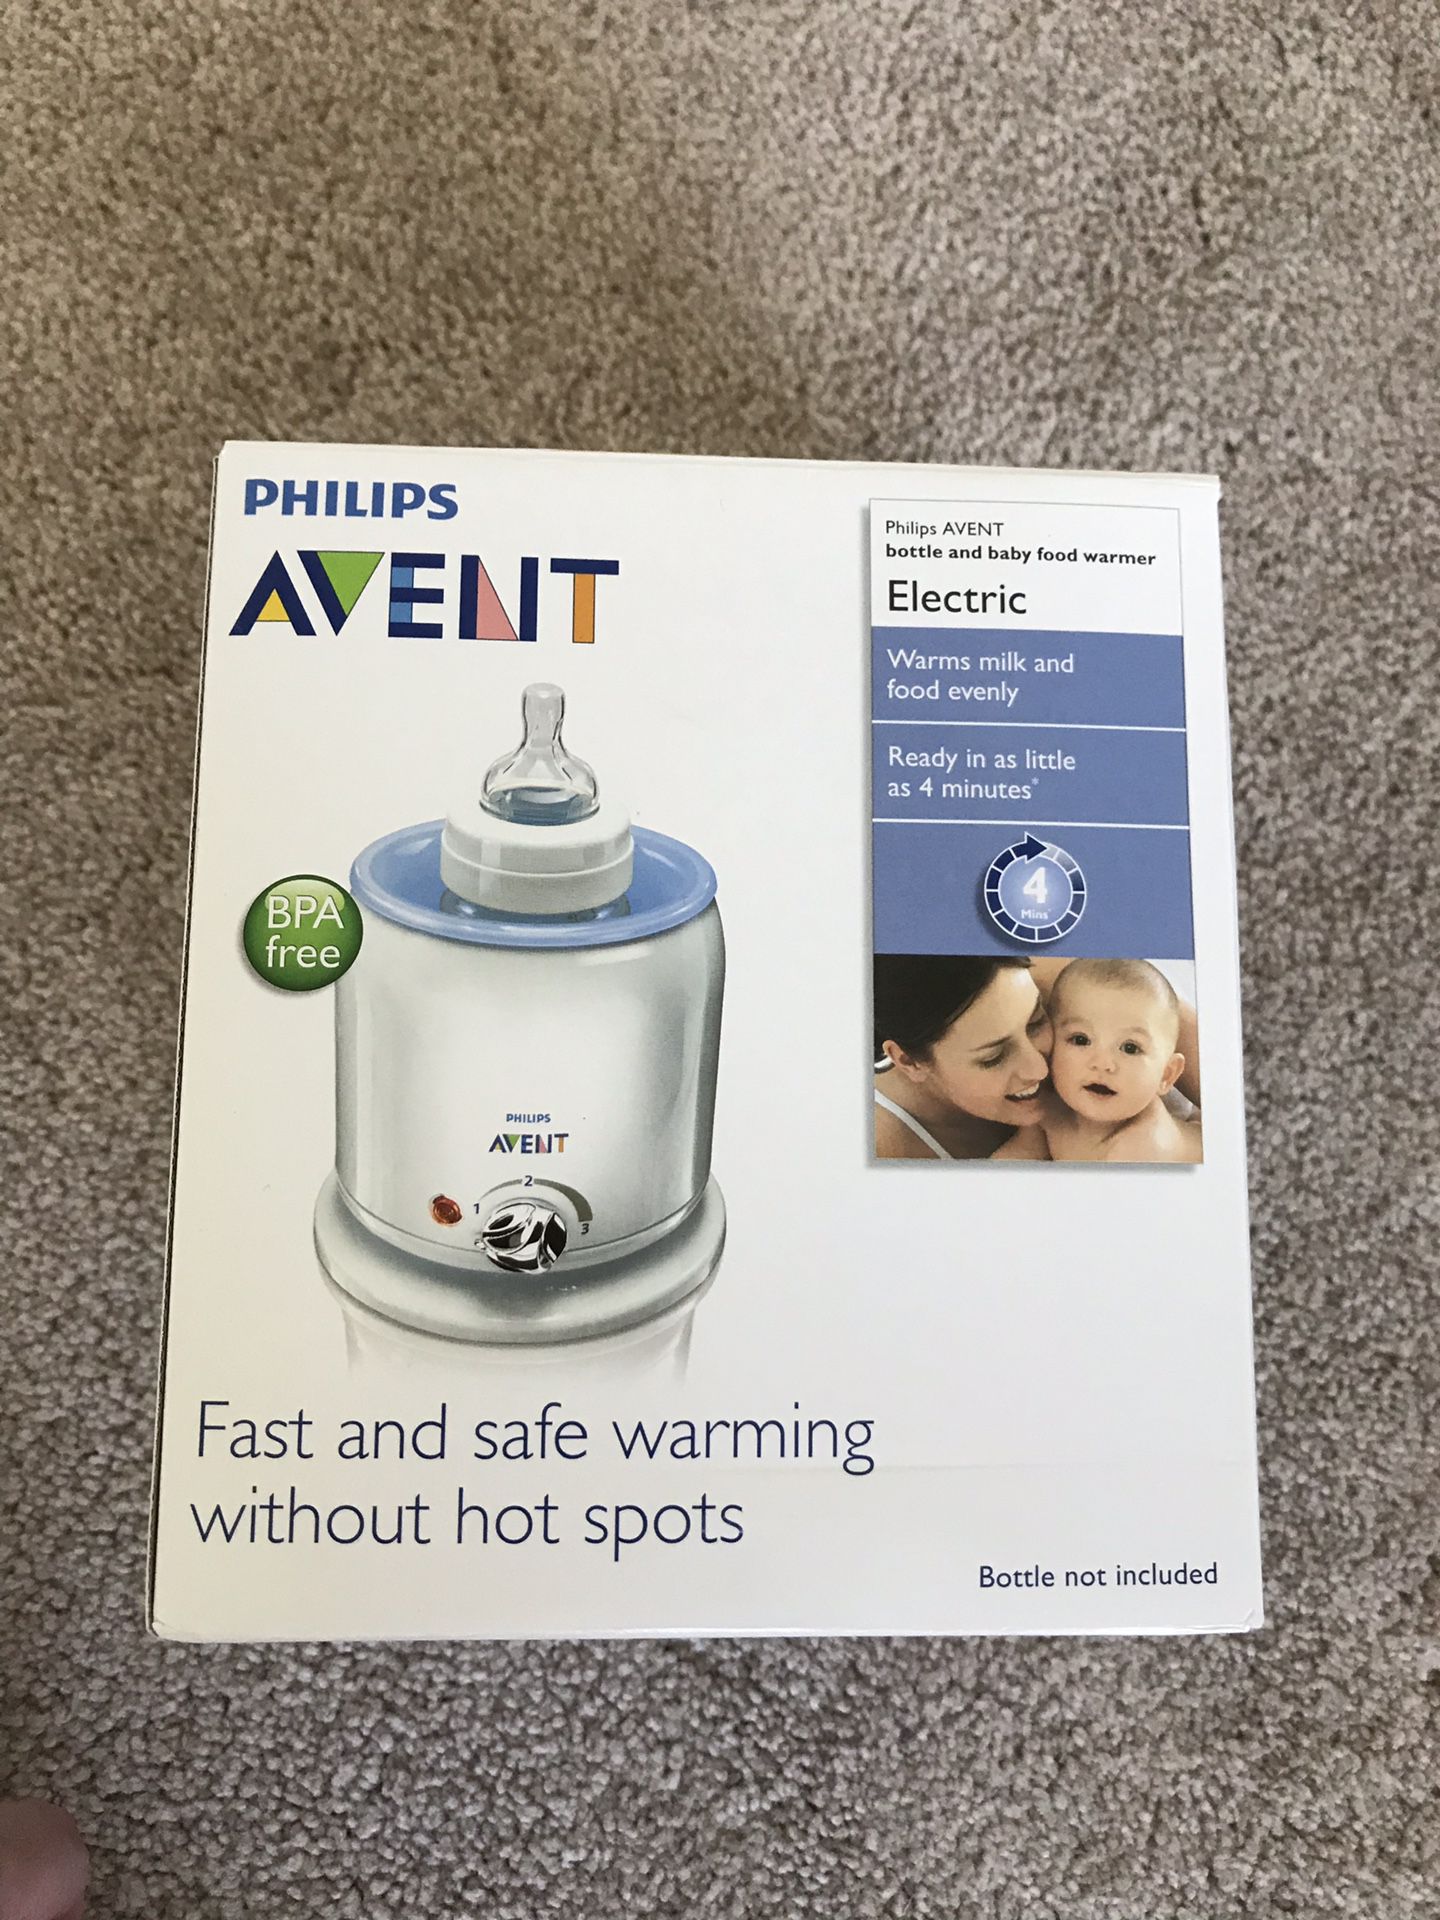 Philips Avent bottle and baby food warmer